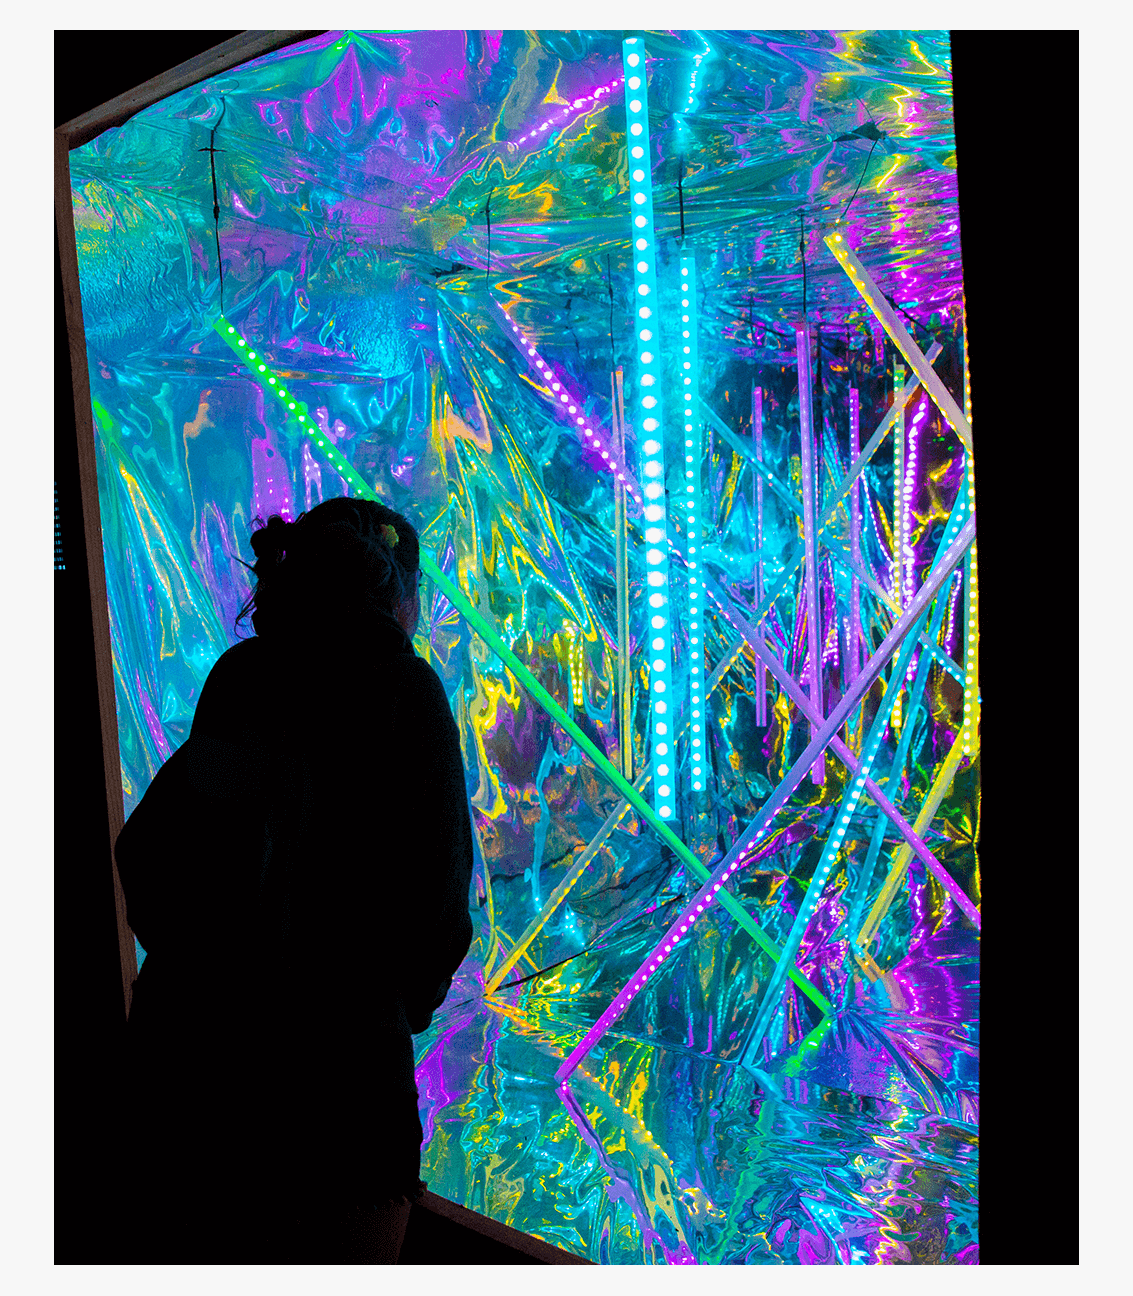 Photo of girl at the Hanging LED Tube light container art installation at Bonnaroo Music & Arts Festival in Manchester, Tennessee